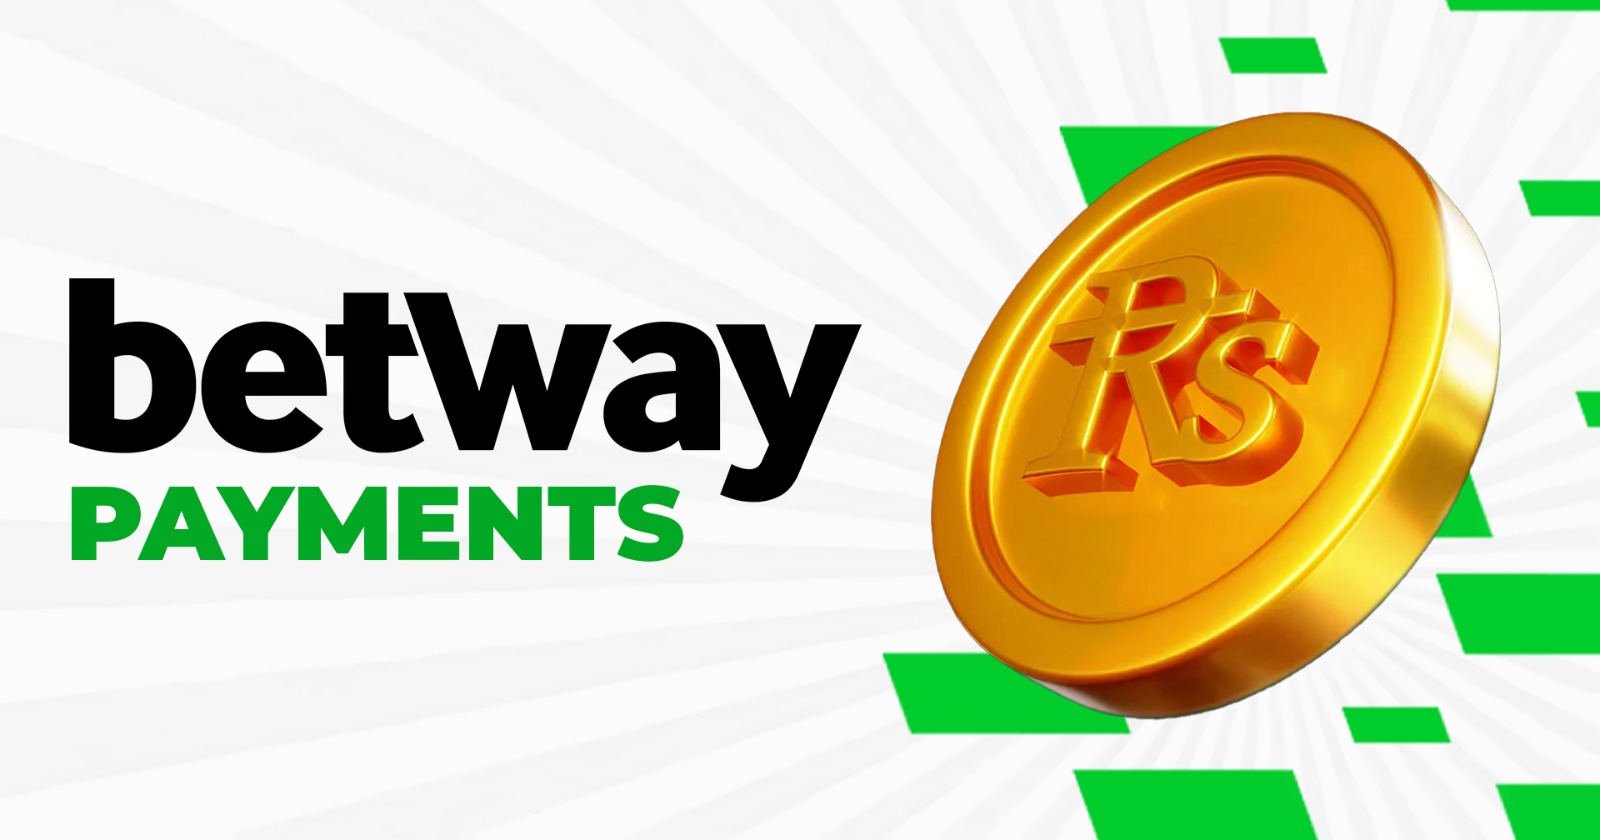 Betway Payments